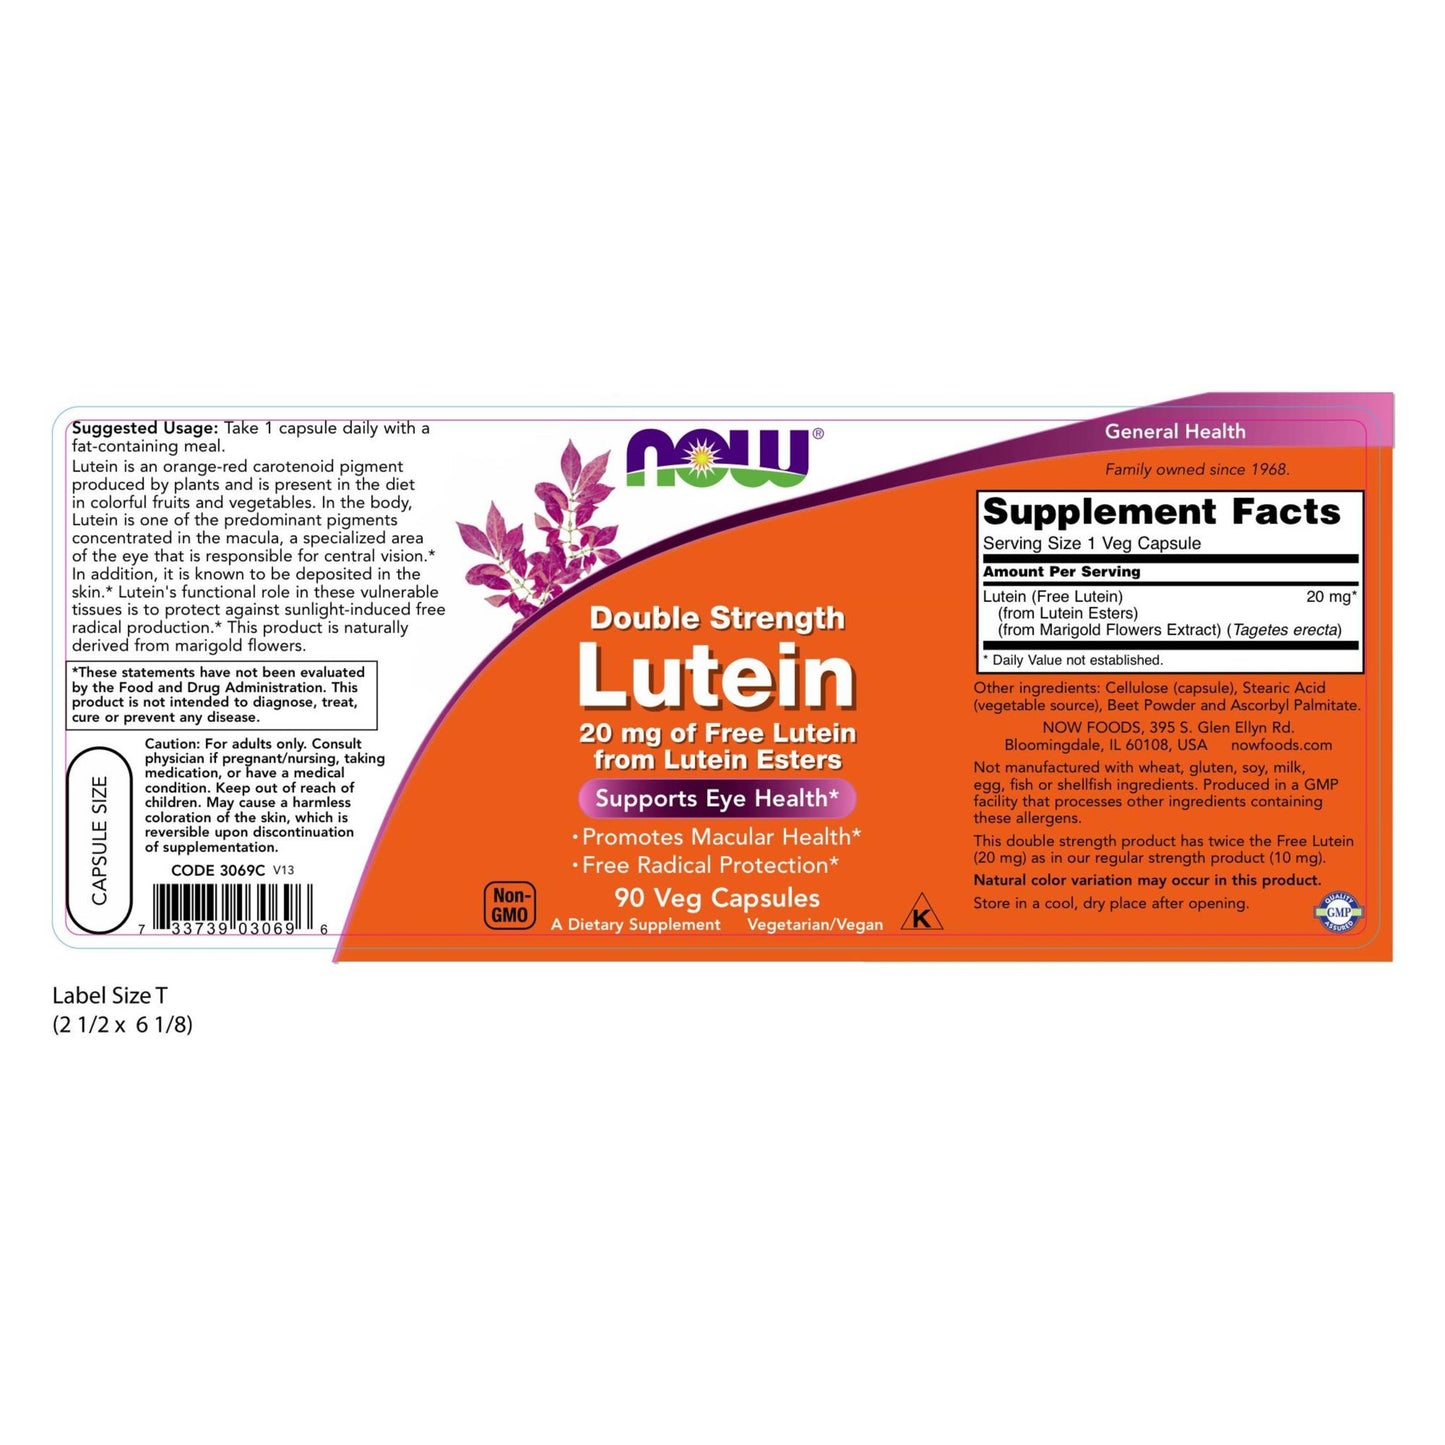 NOW Foods Lutein Double Strength - 20mg